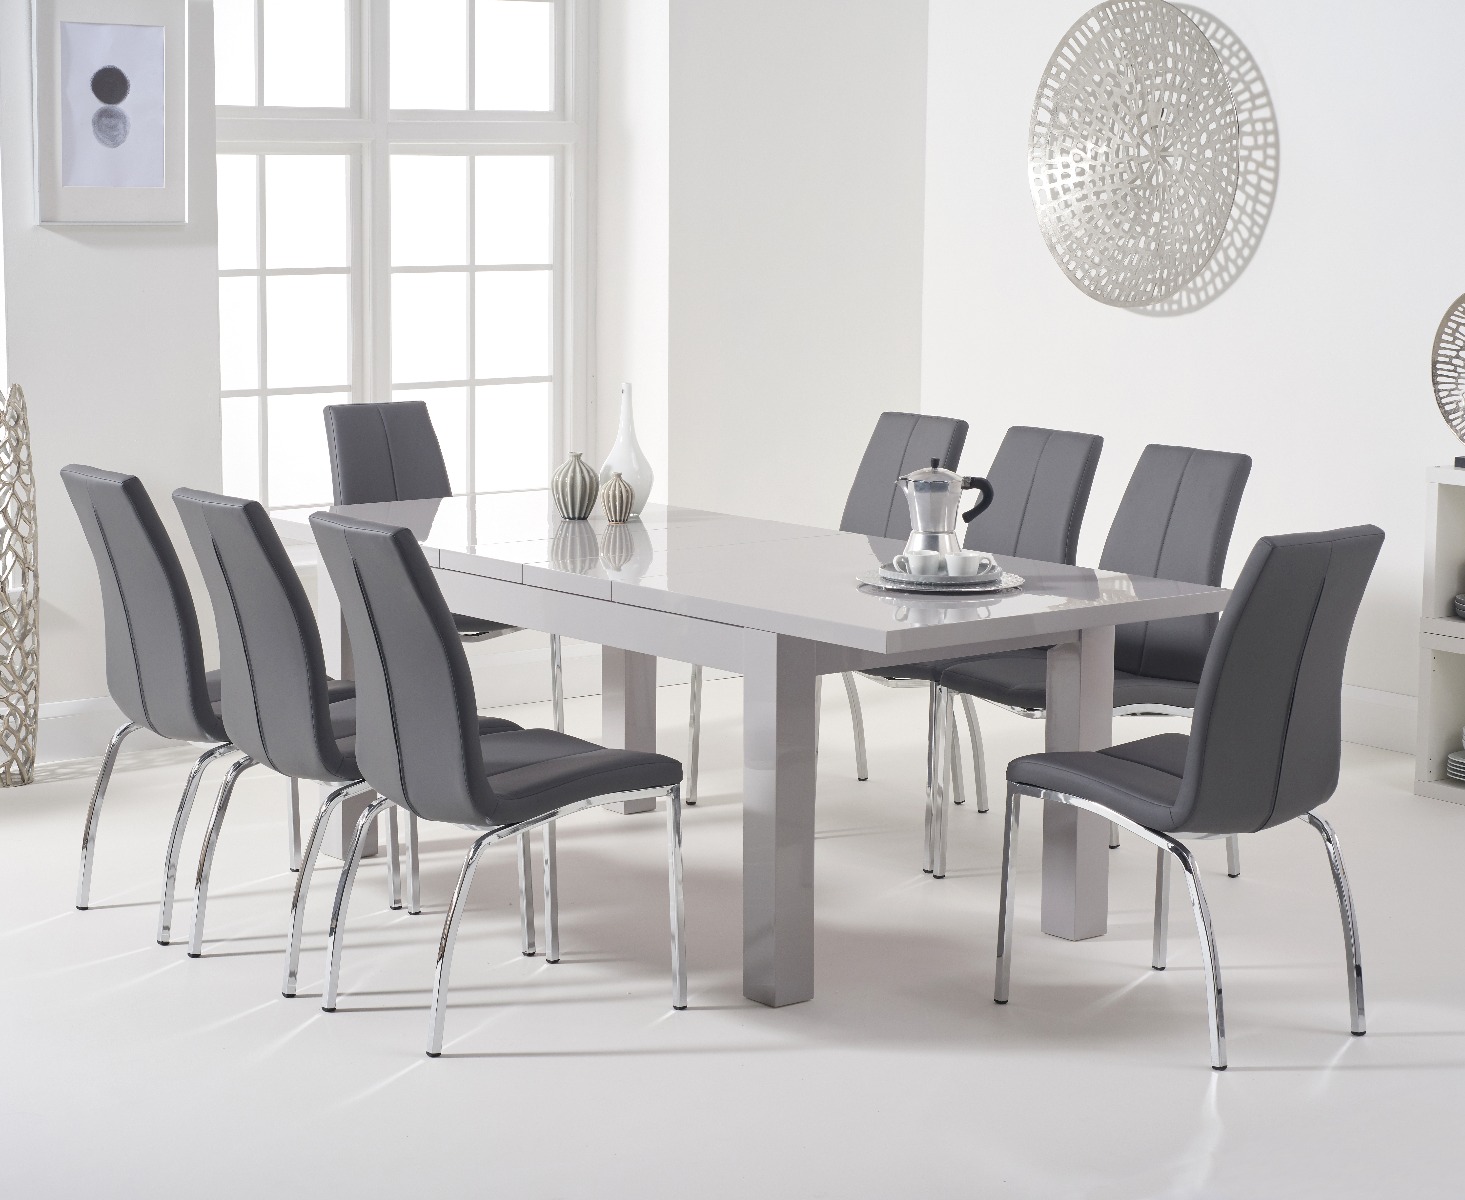 Atlanta Light Grey Gloss 160220cm Extending Dining Table With 4 Black Cavello Chairs